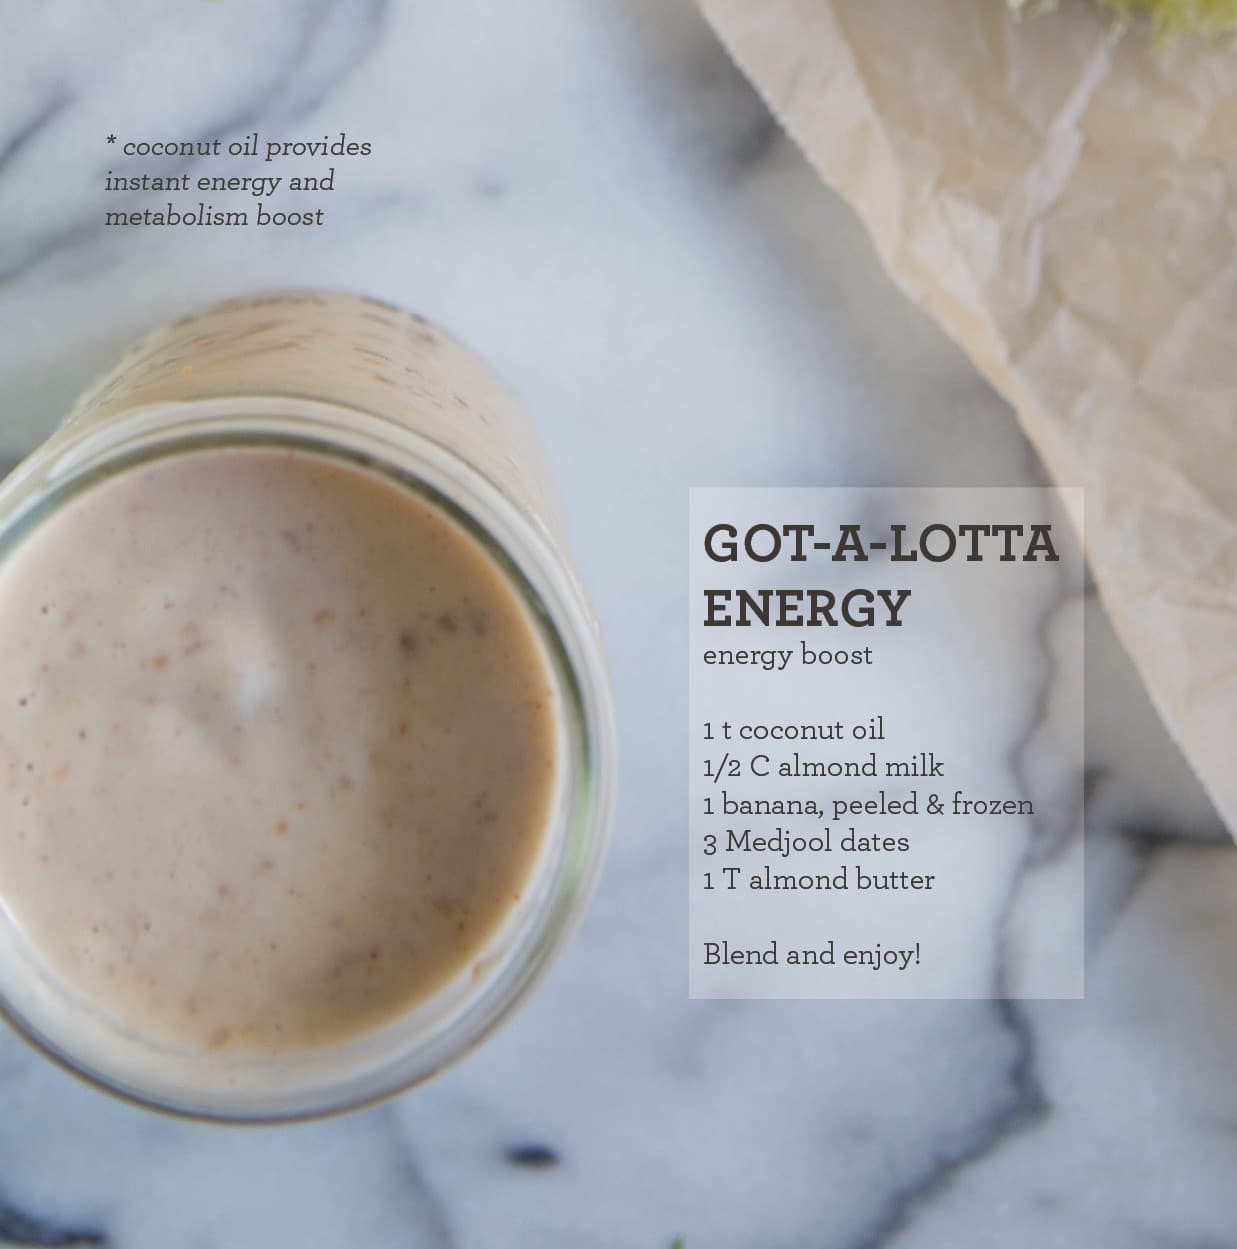 3 PM Slump? Not you! Our Got a lotta Energy smoothie has your back. Each ingredient hands over instant energy and a metabolism boost to match.